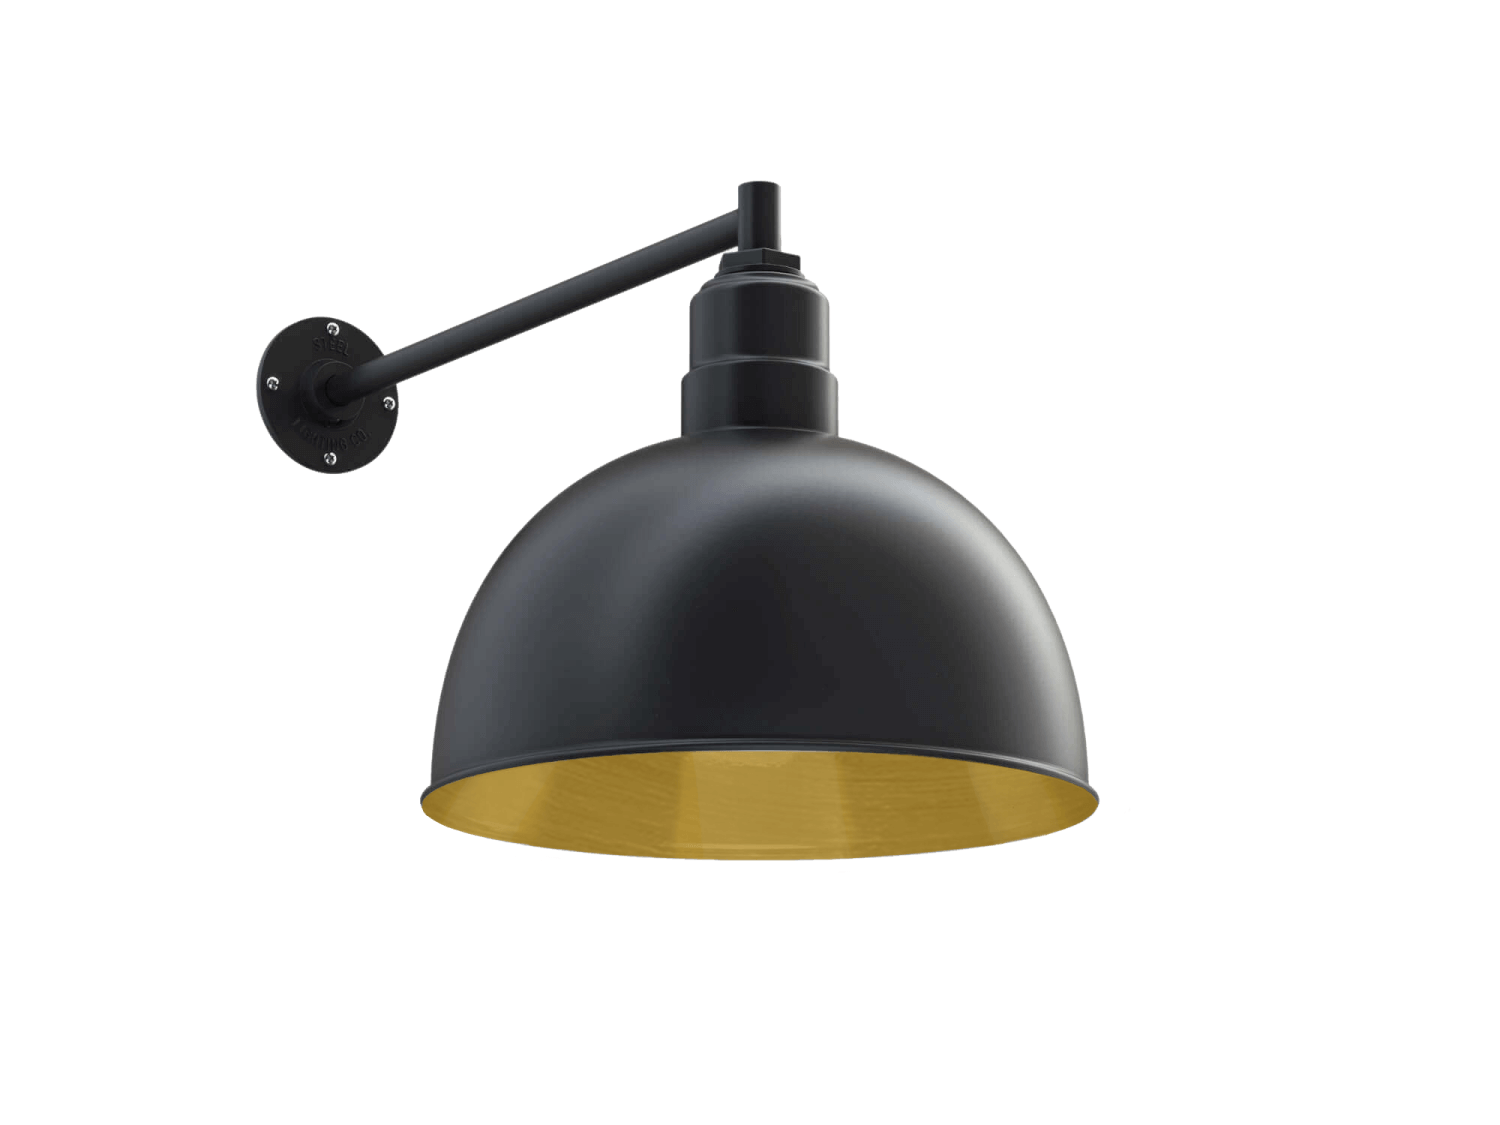 Hollywood Bowl Wall Mounted Light Fixture in Brass by Steel Lighting Co.